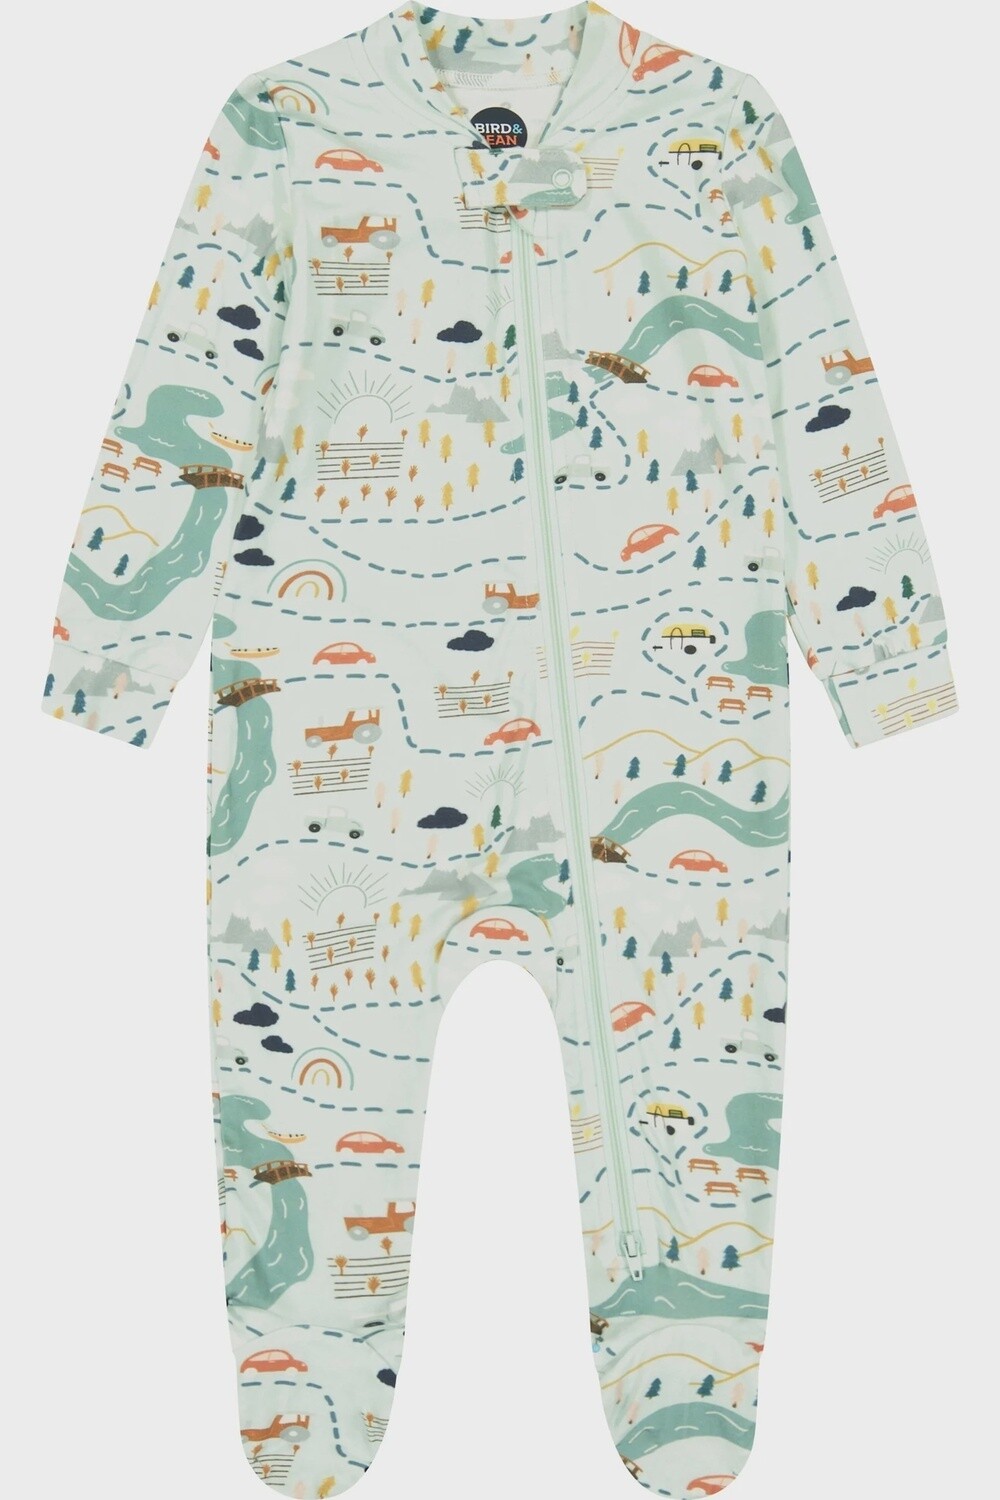 Baby Footed Zip Pajama - On the Road Again, Size: 6-12M